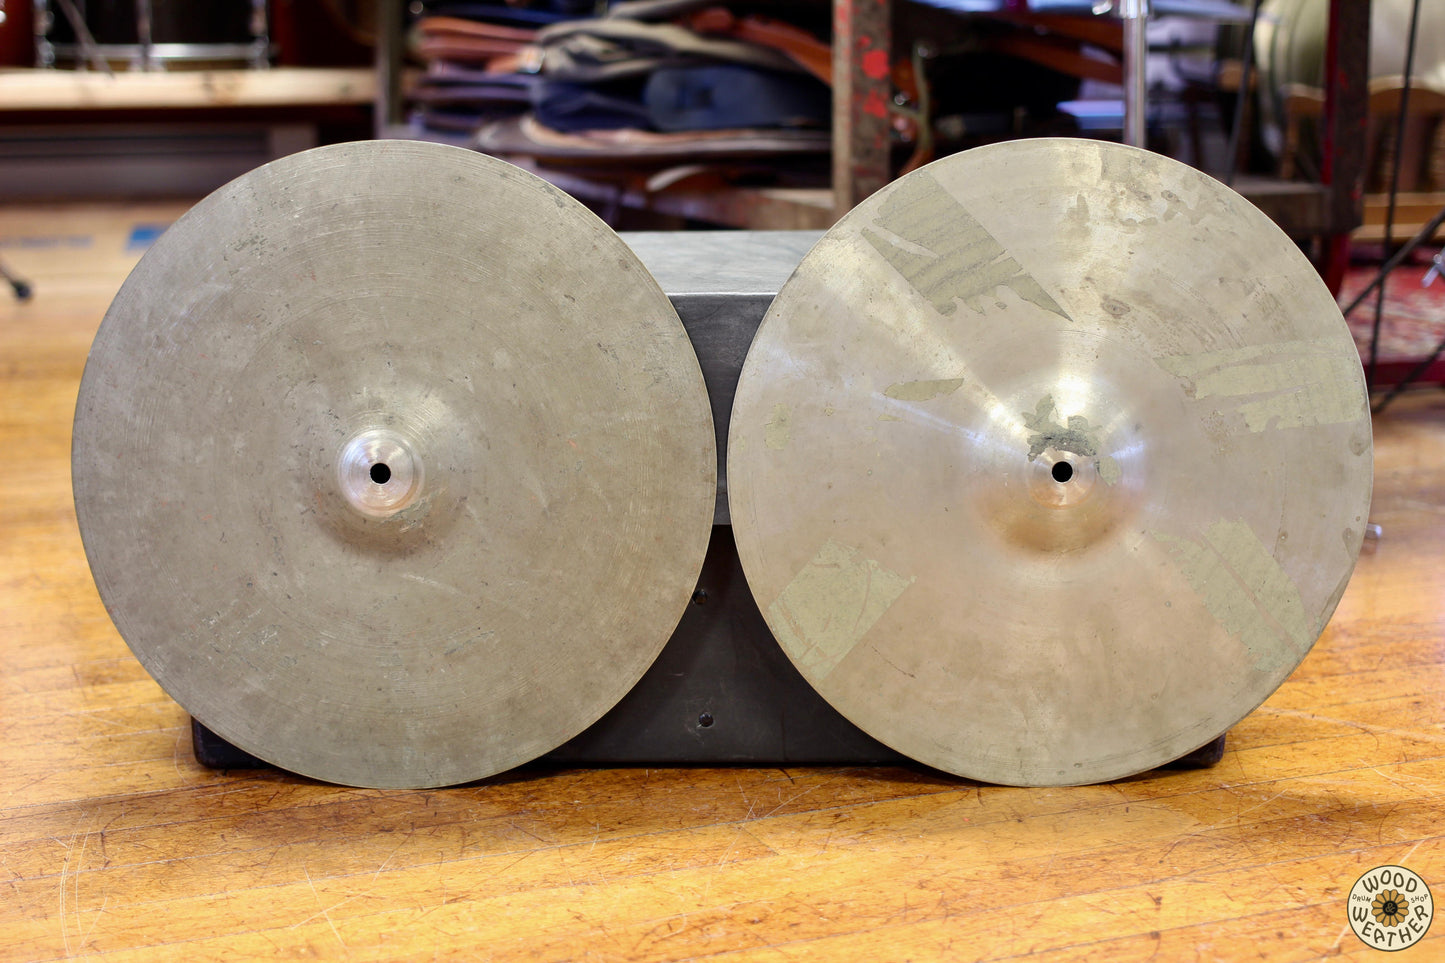 1960s Beverly 14" Hi-Hat Cymbals 545/610g